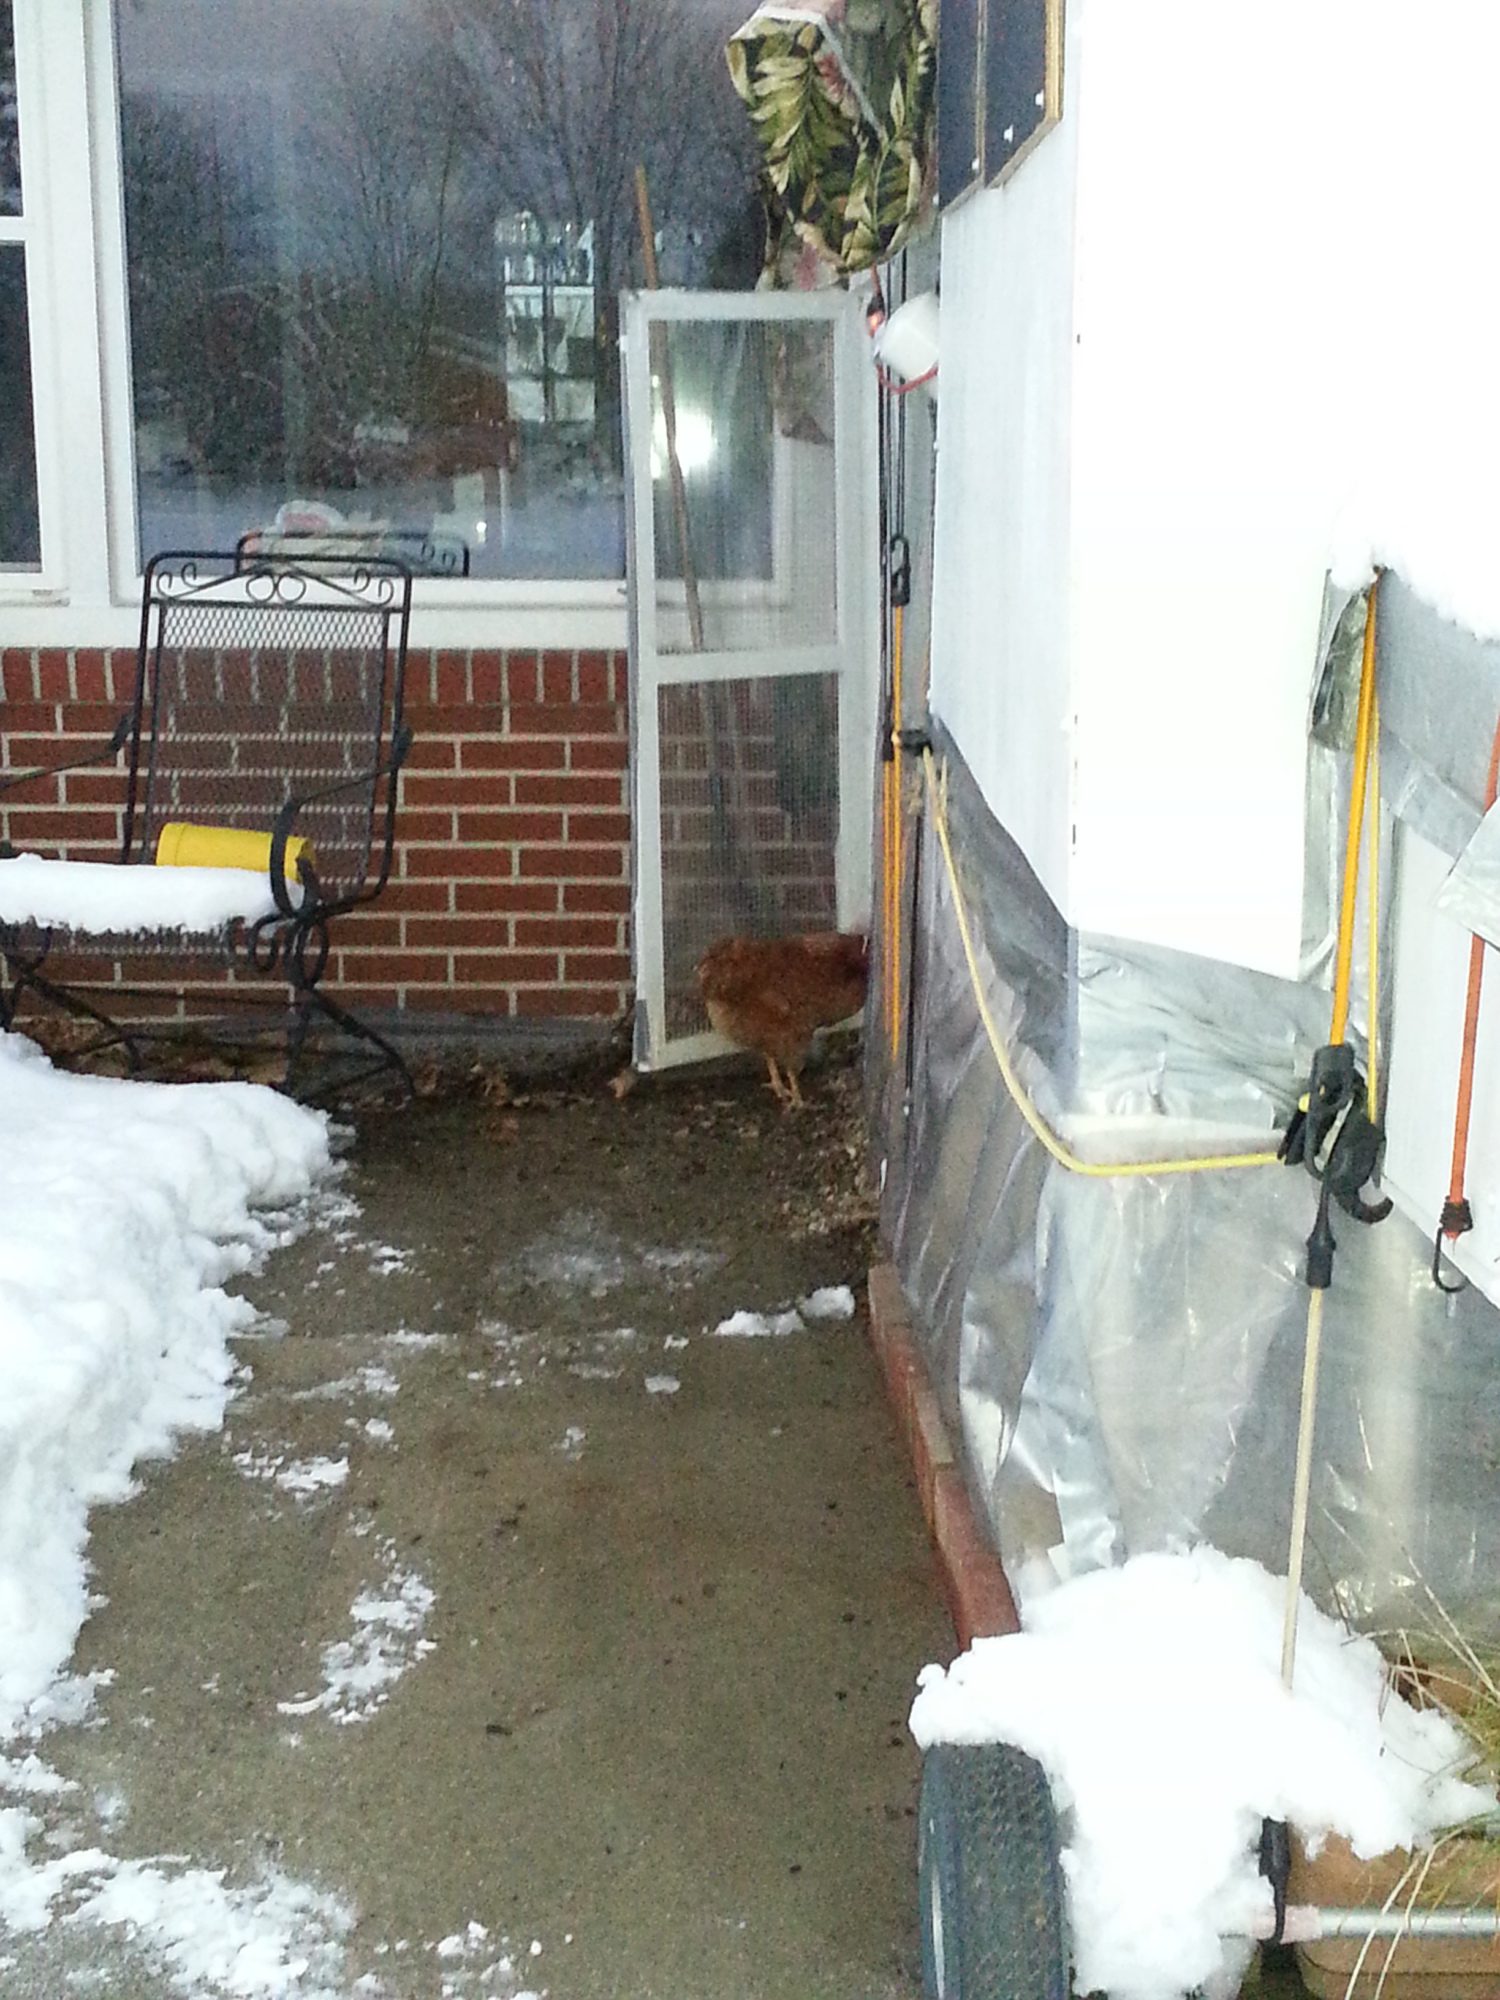 Nope, going back in.  I don't like snow says Penny.